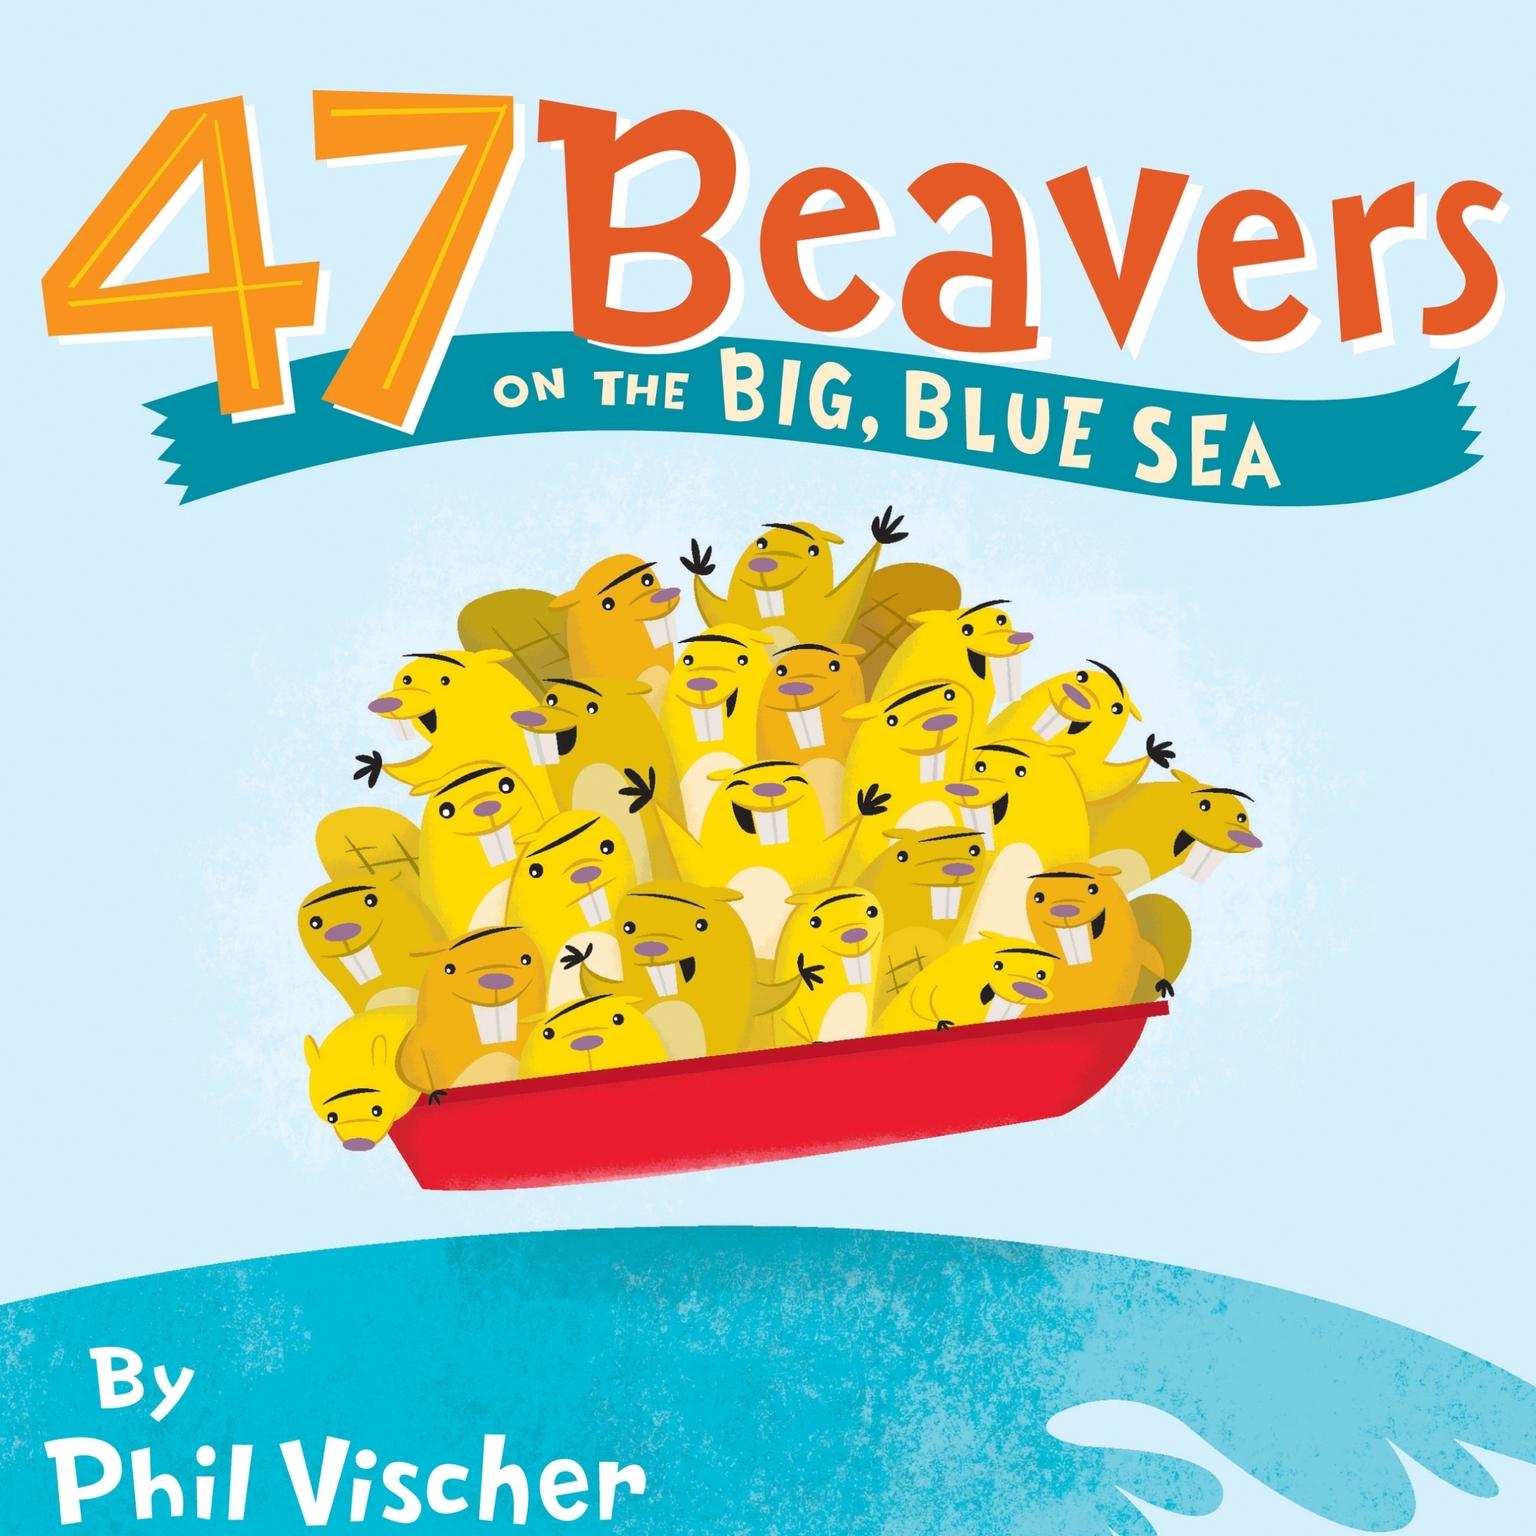 47 Beavers on the Big, Blue Sea Audiobook, by Phil Vischer